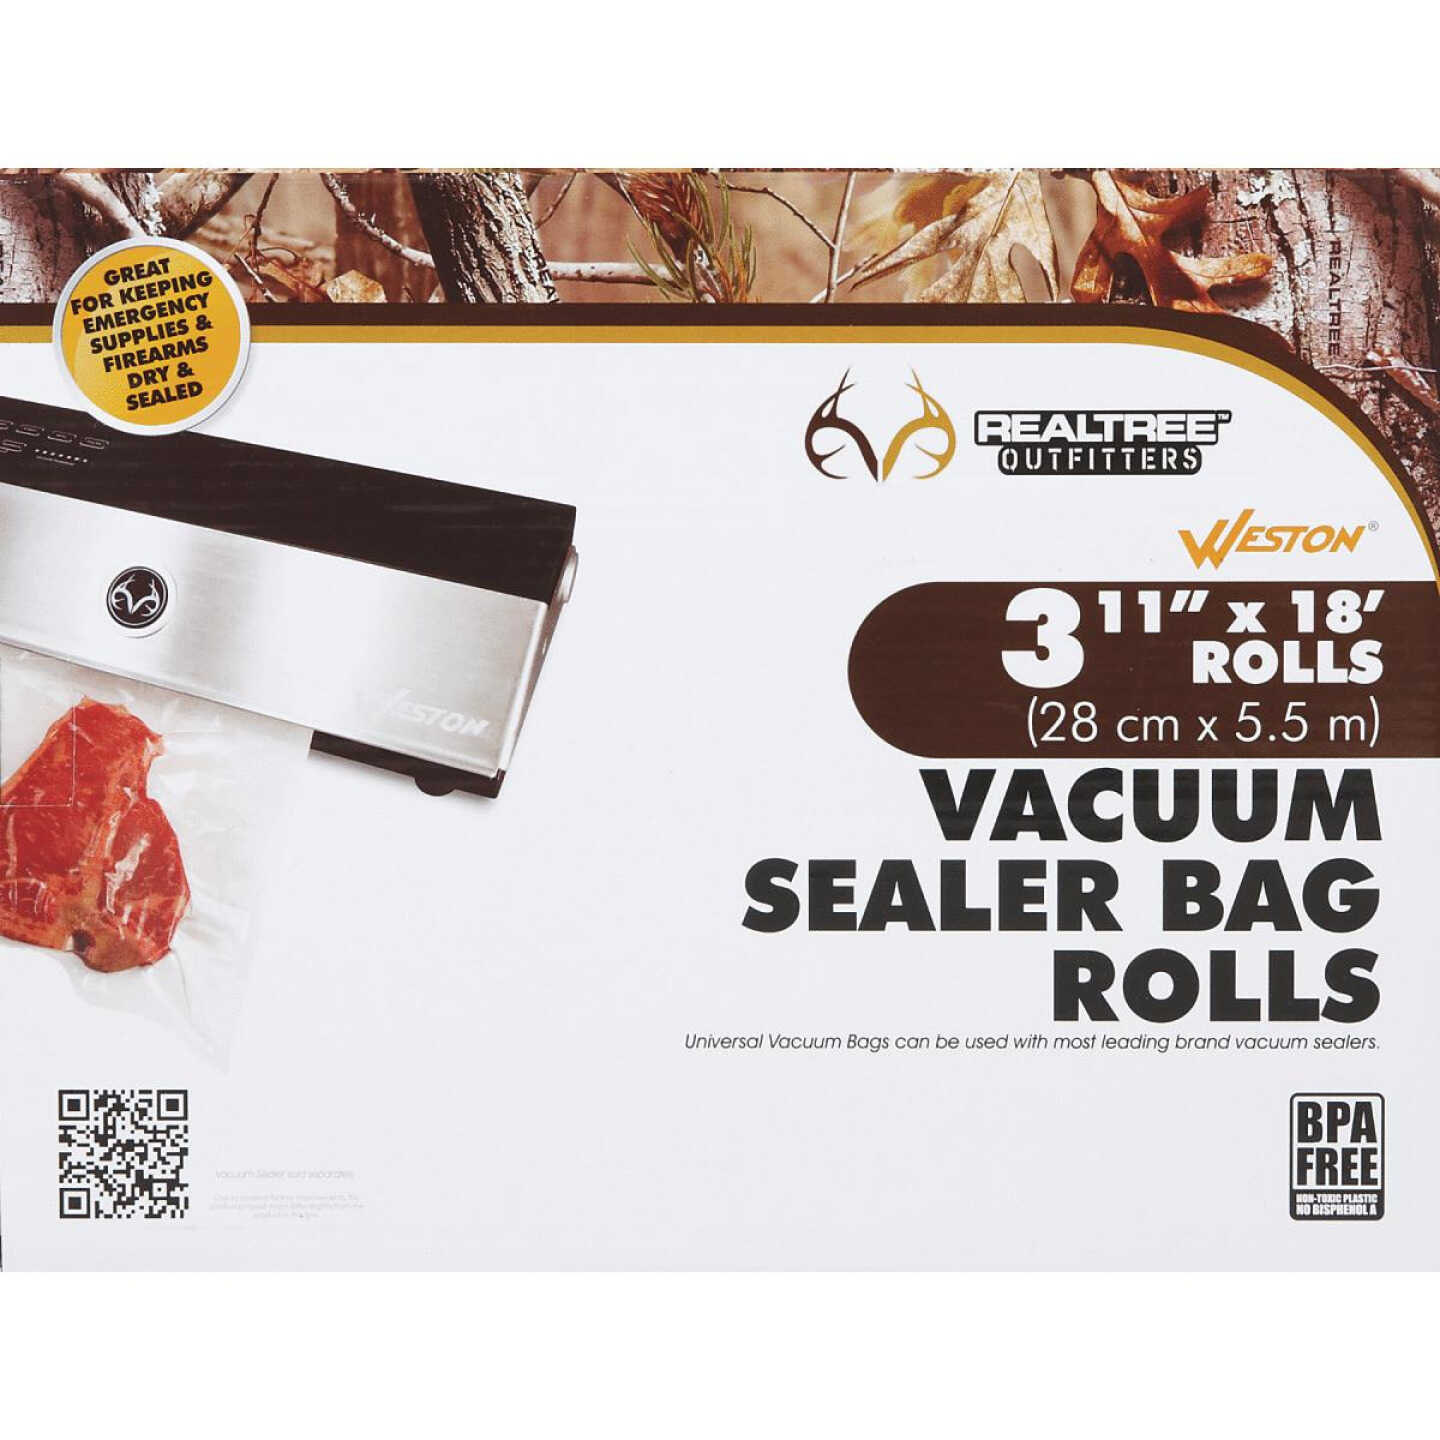 Greater Goods Vacuum Seal Rolls - Pack of 3 Rolls of Food Saver Bags